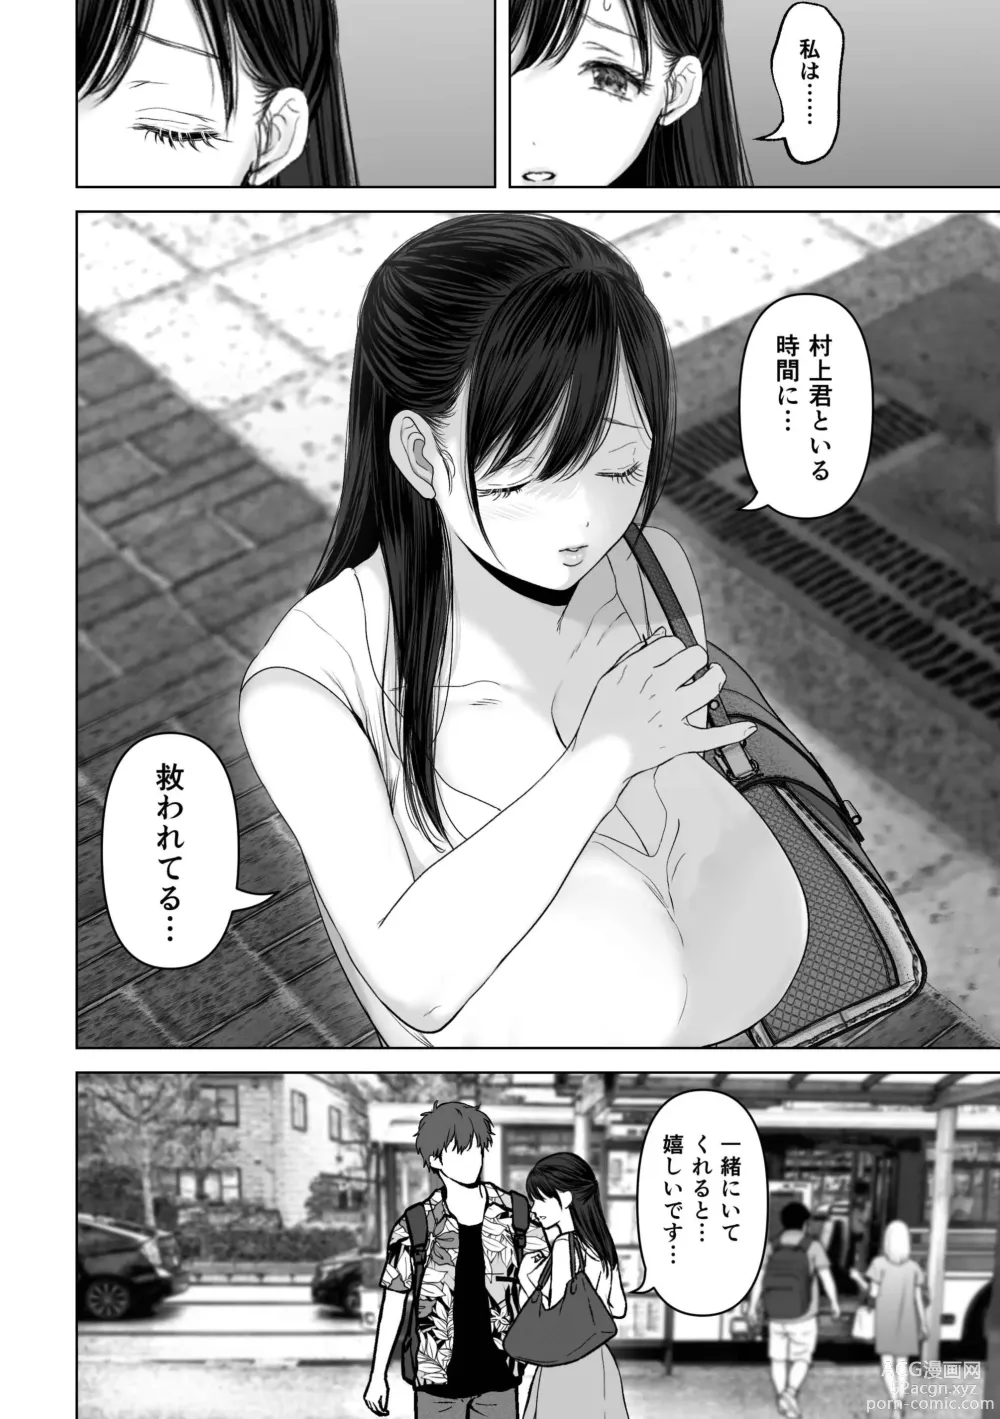 Page 17 of doujinshi If you want-4~Rich vaginal shot edition to a swaying married woman saffle~